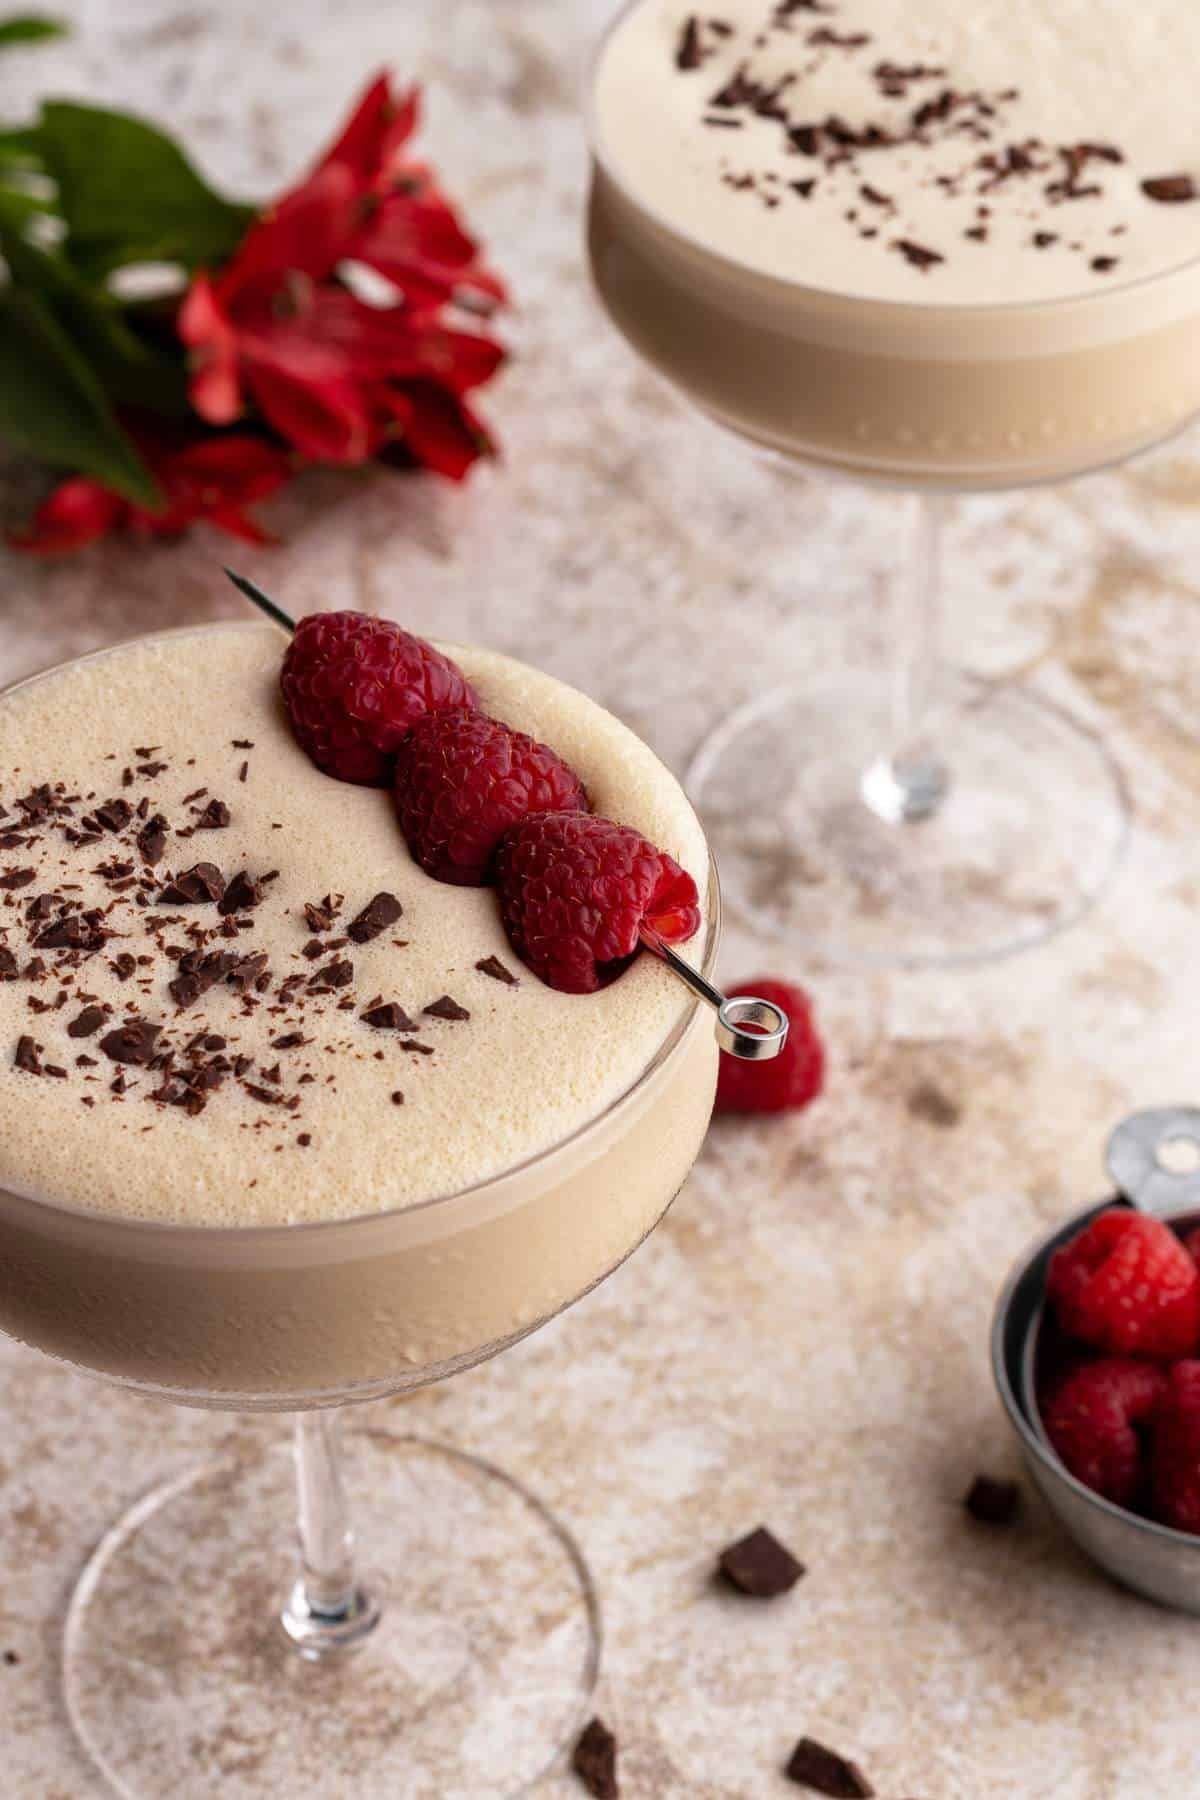 Raspberry chocolate martini in a glass with shaved chocolate pieces.